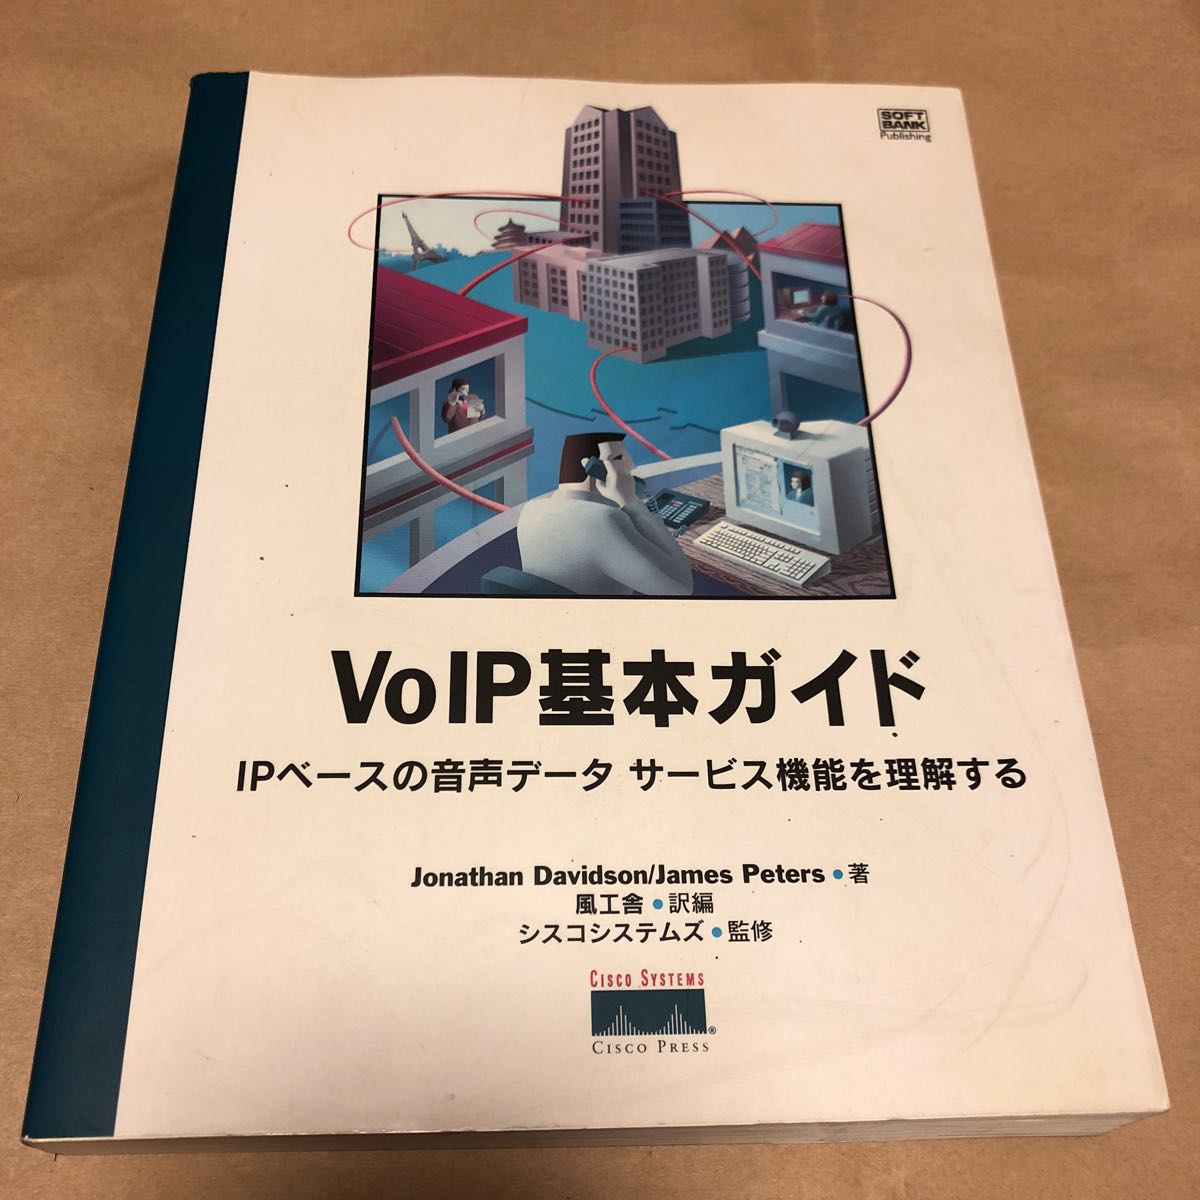 Volp basis guide [IP base. sound data service function . understanding make ]* prompt decision *